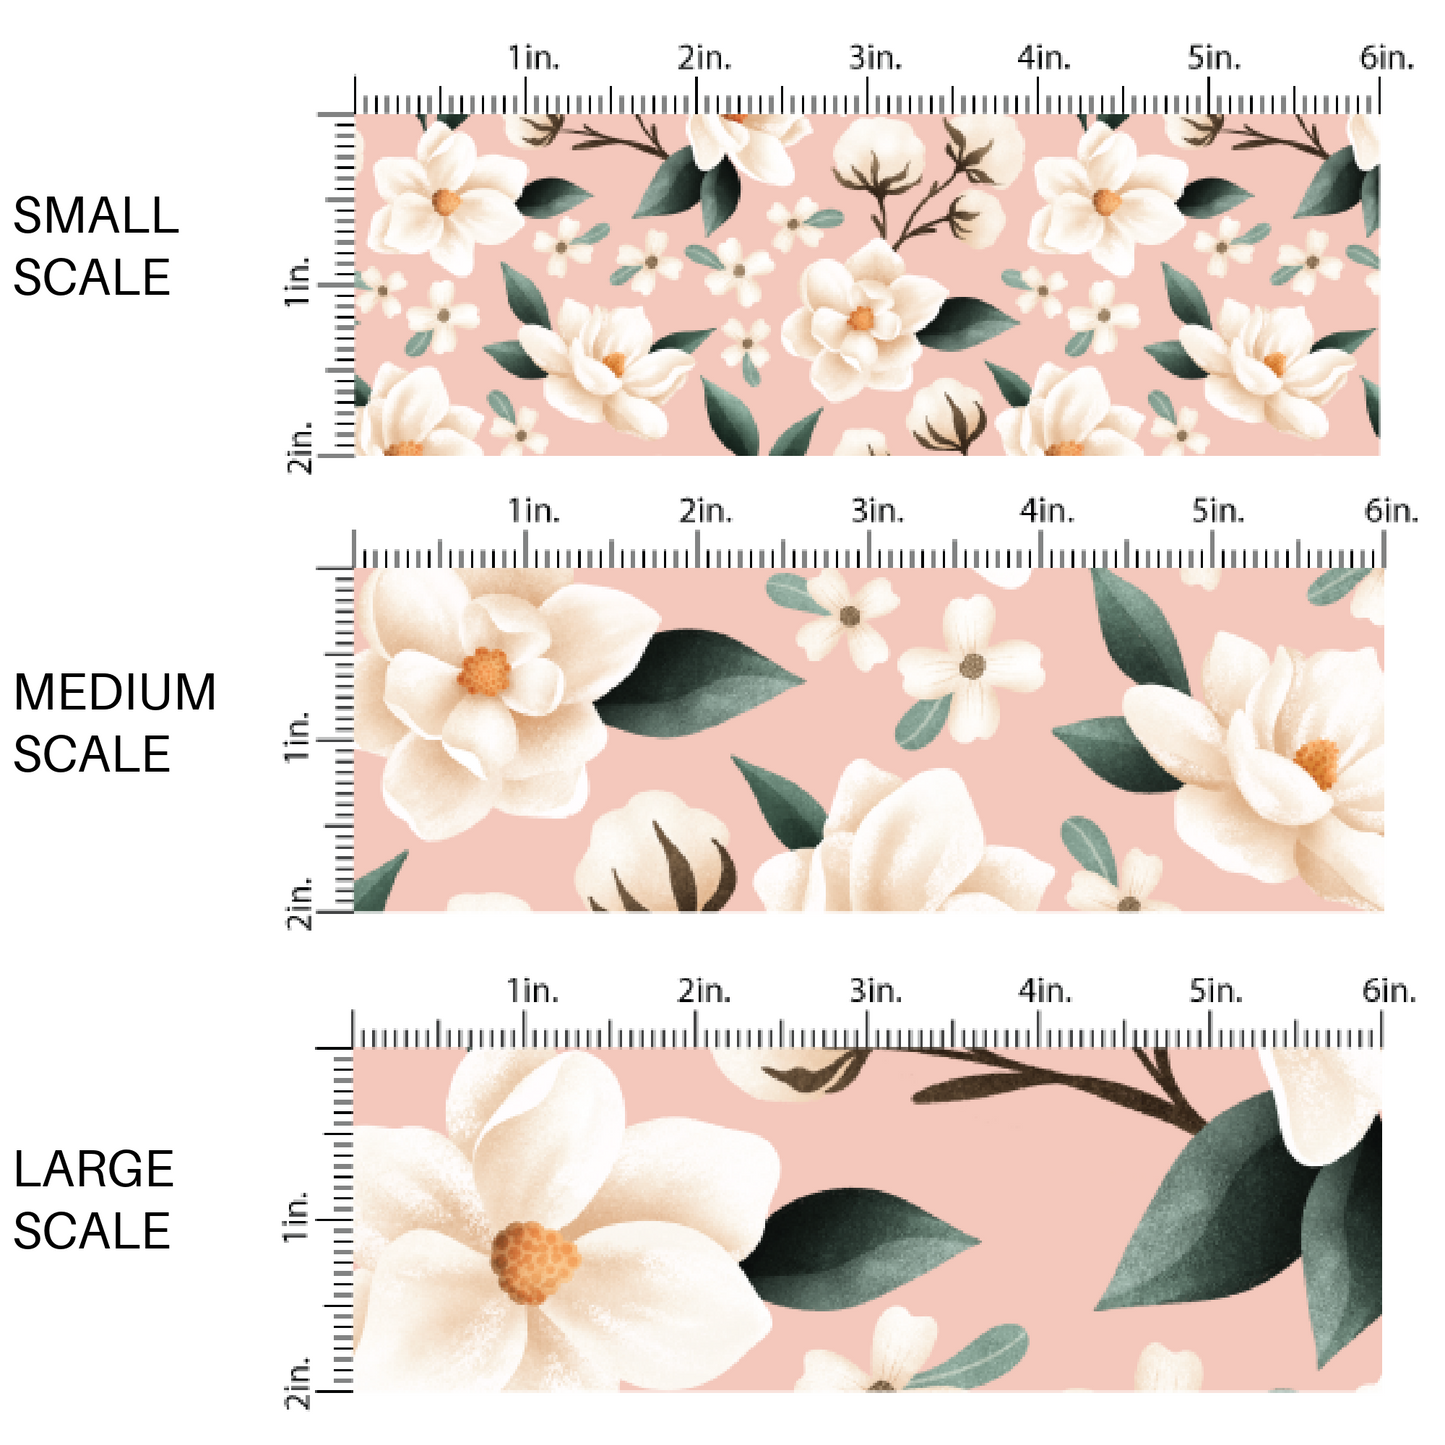 Peach, pink, and green flowers, peaches, dots, and gators on high quality fabric adaptable for all your crafting needs. Make cute baby headwraps, fun girl hairbows, knotted headbands for adults or kids, clothing, and more!